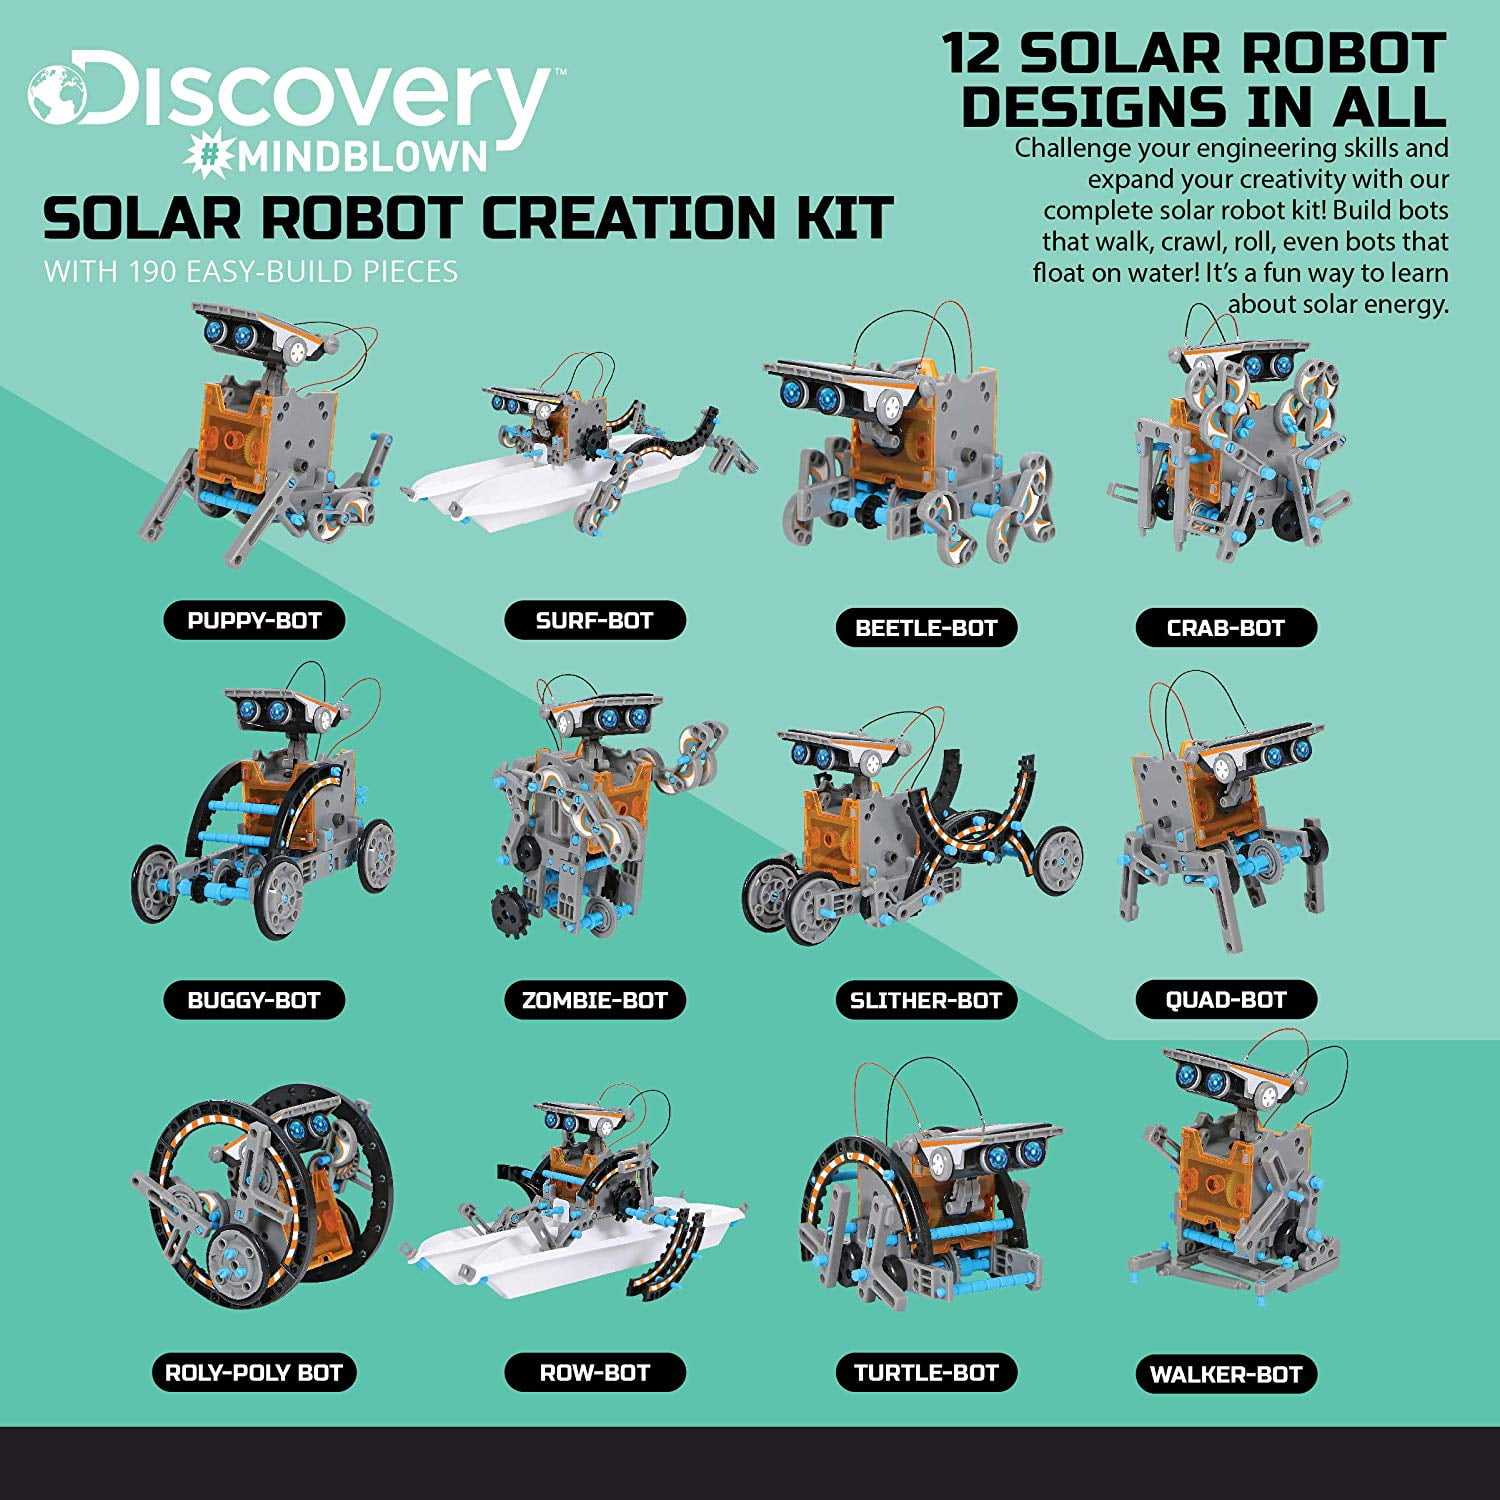 Details about   Discovery #mindblown solar robot creation kit 12 IN 1 STEM Motorized 